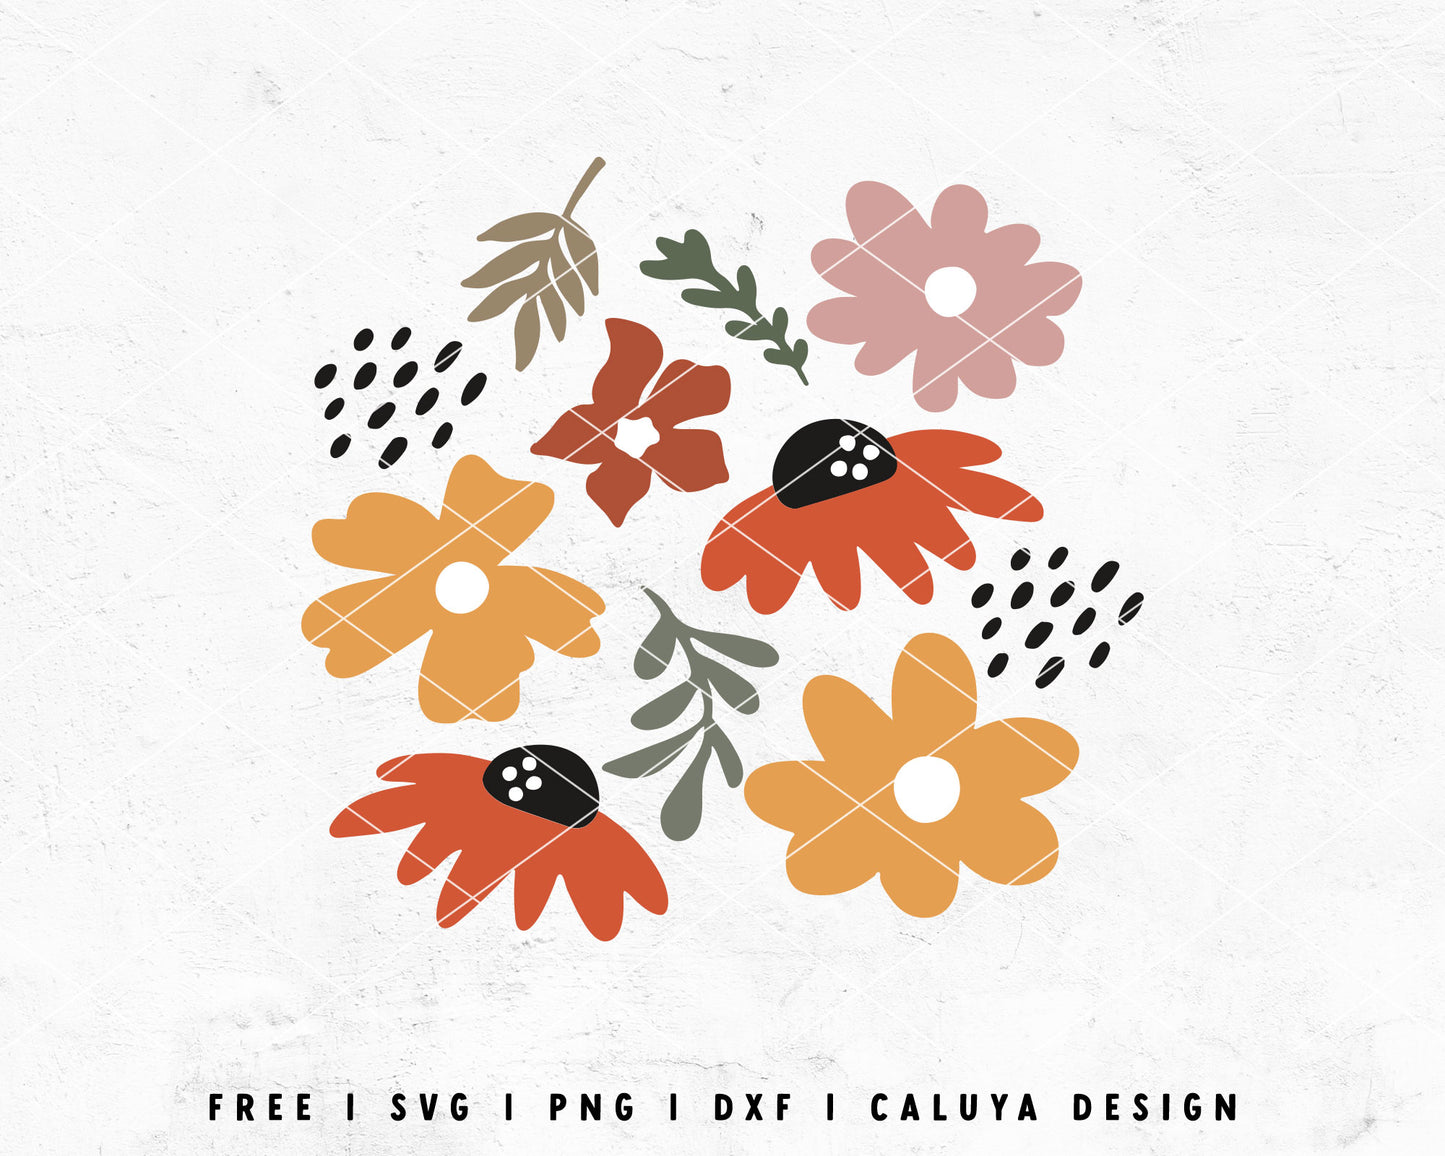 FREE  Abstract Flower | Daisy Matisse Flower SVG Cut File for Cricut, Cameo Silhouette | Free SVG Cut File